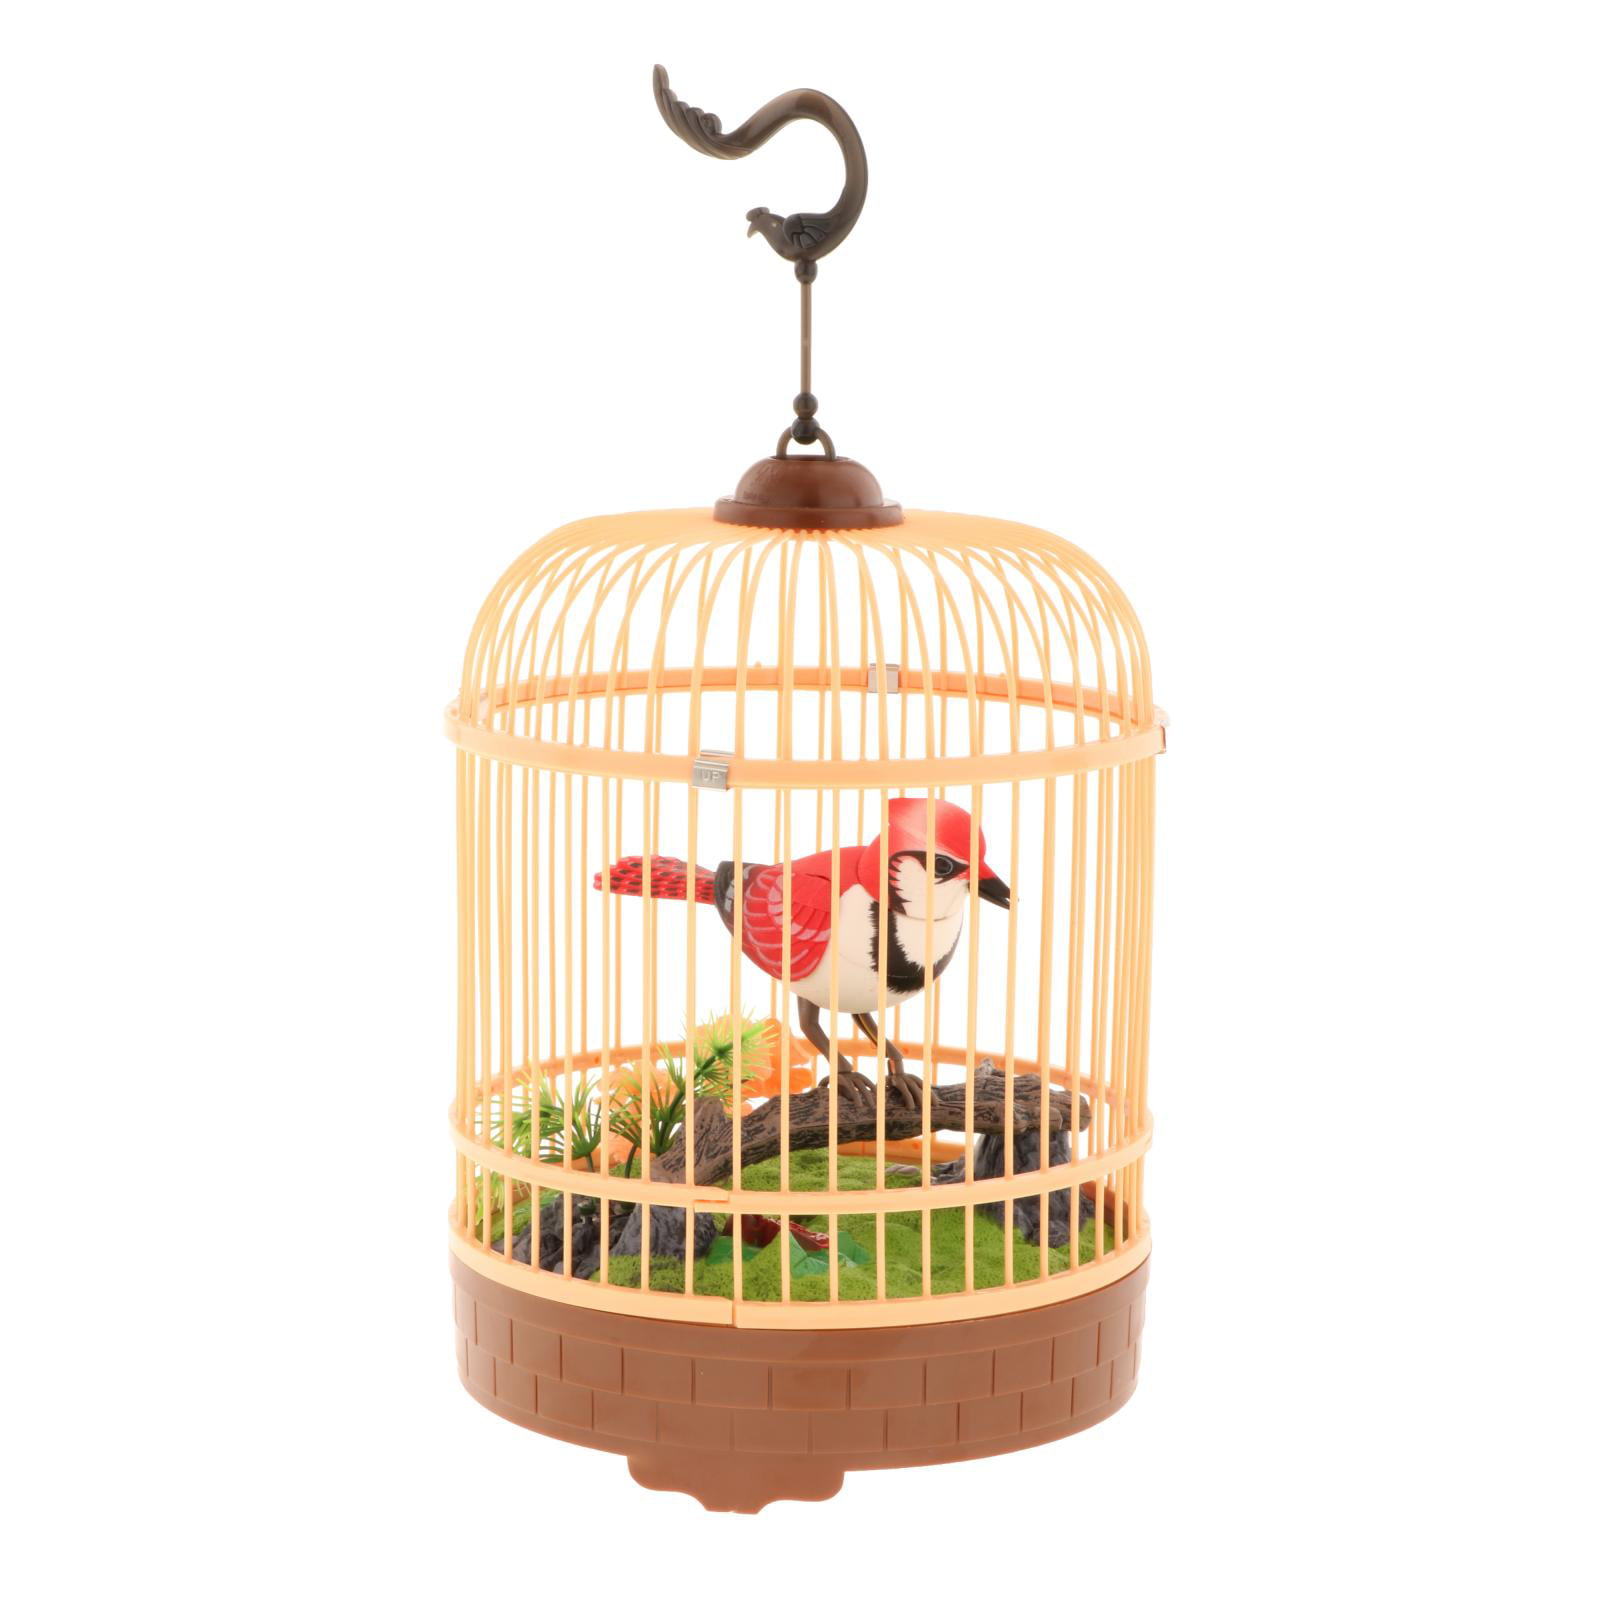 Sound Activated Chirp Toy Battery Powered Singing & Chirping Bird in Cage 